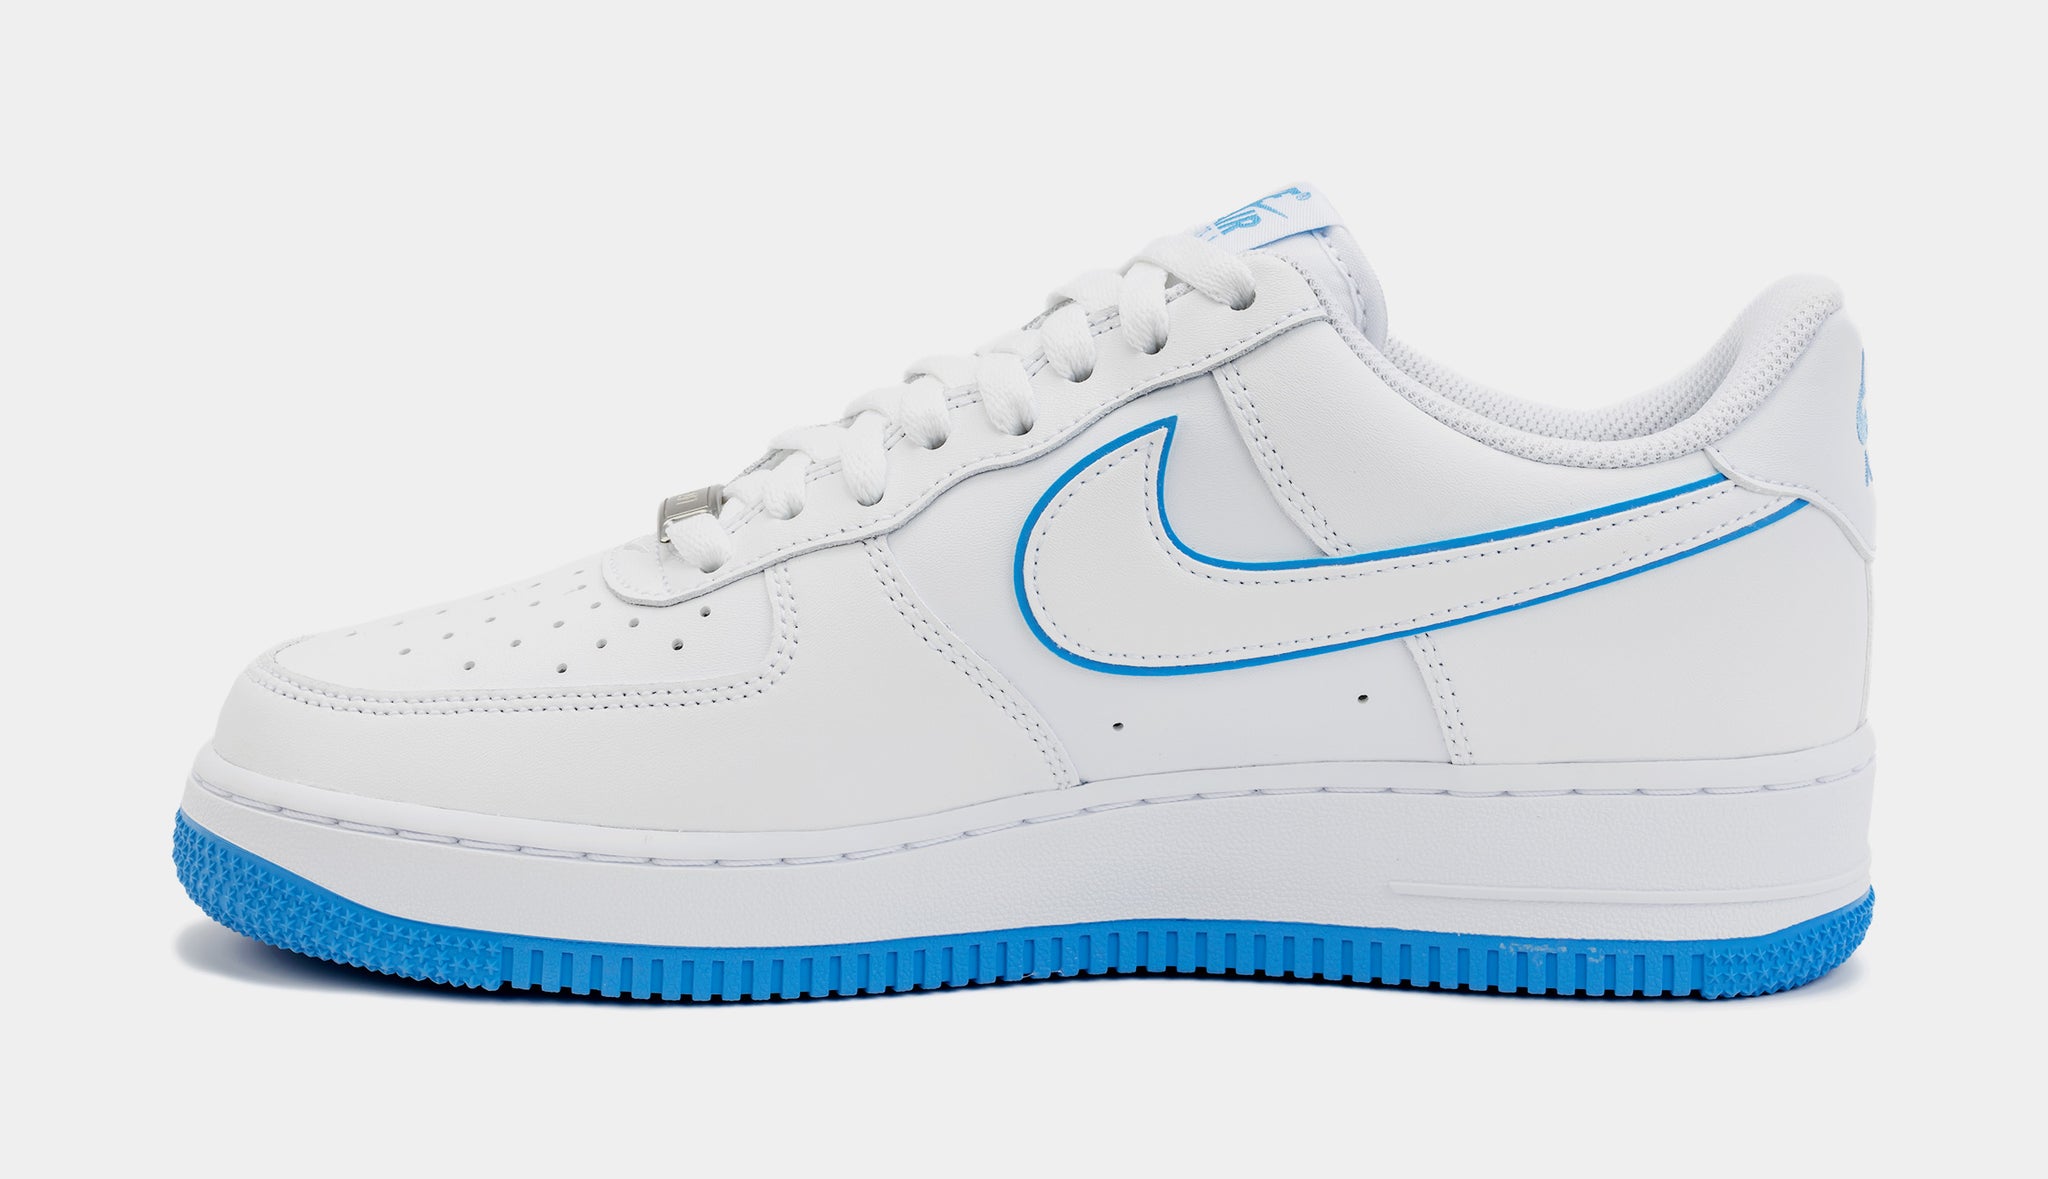 Nike Air Force 1 '07 University Blue Mens Lifestyle Shoes White